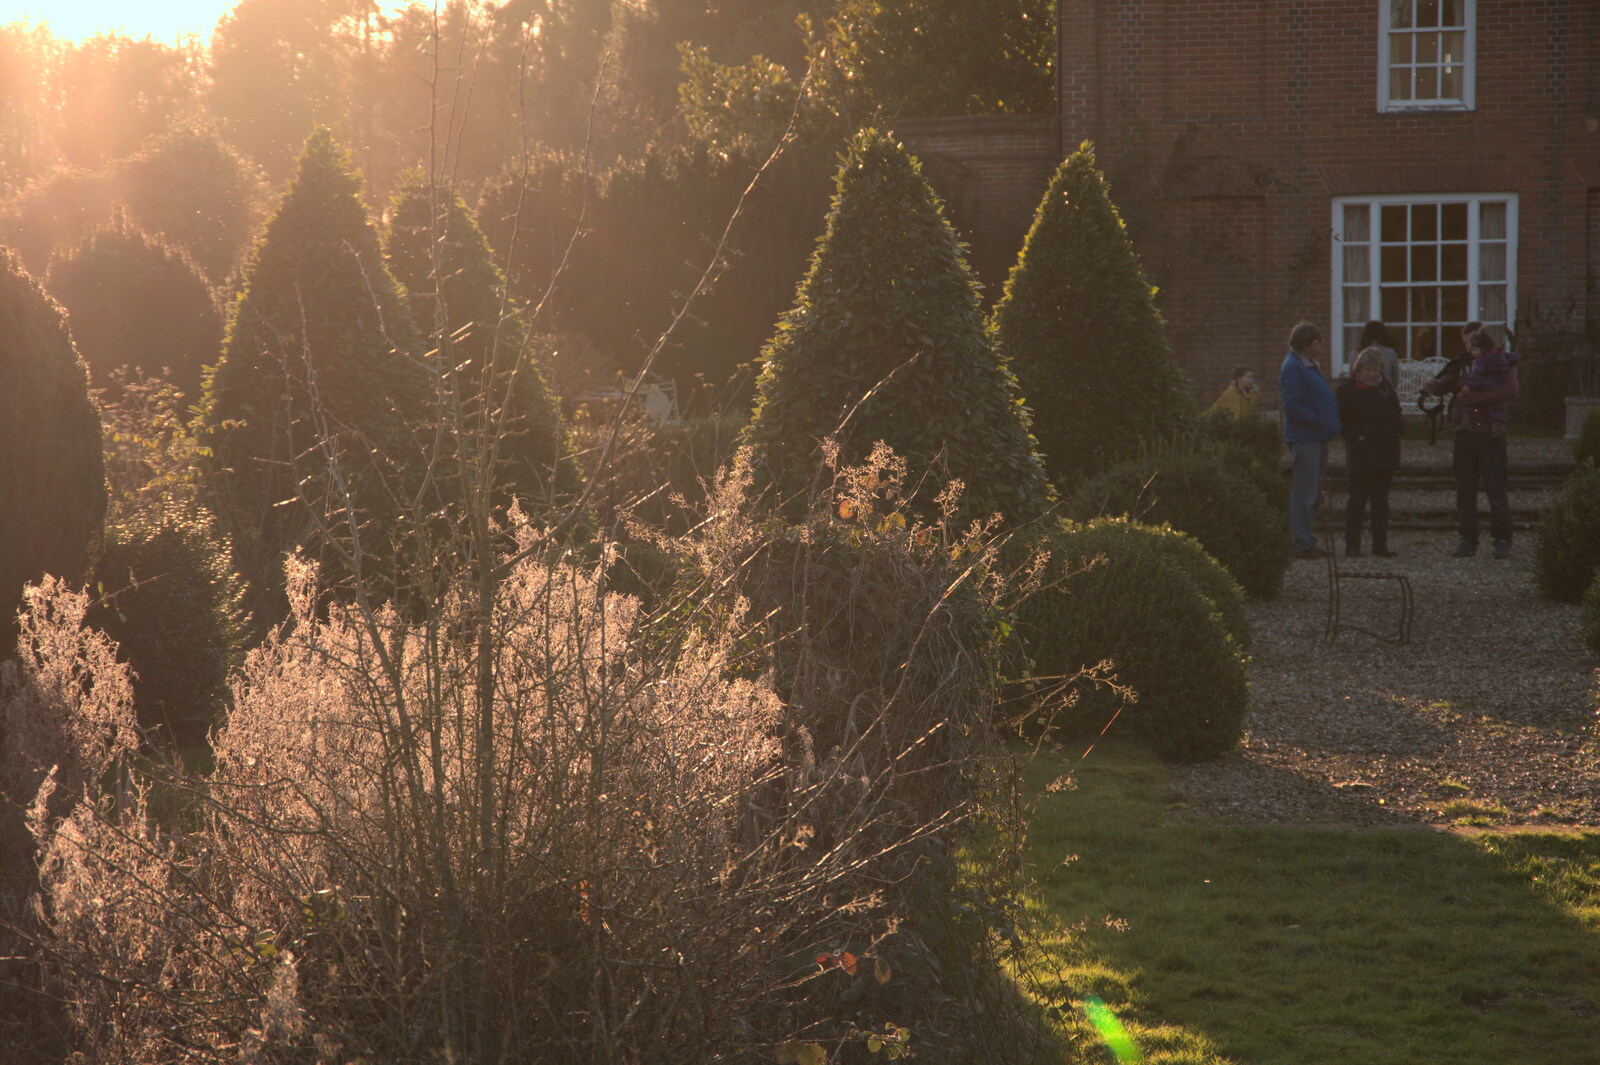 Pointy topiary in the setting sun from Snowdrops at Talconeston Hall, Tacolneston, Norfolk - 7th February 2020